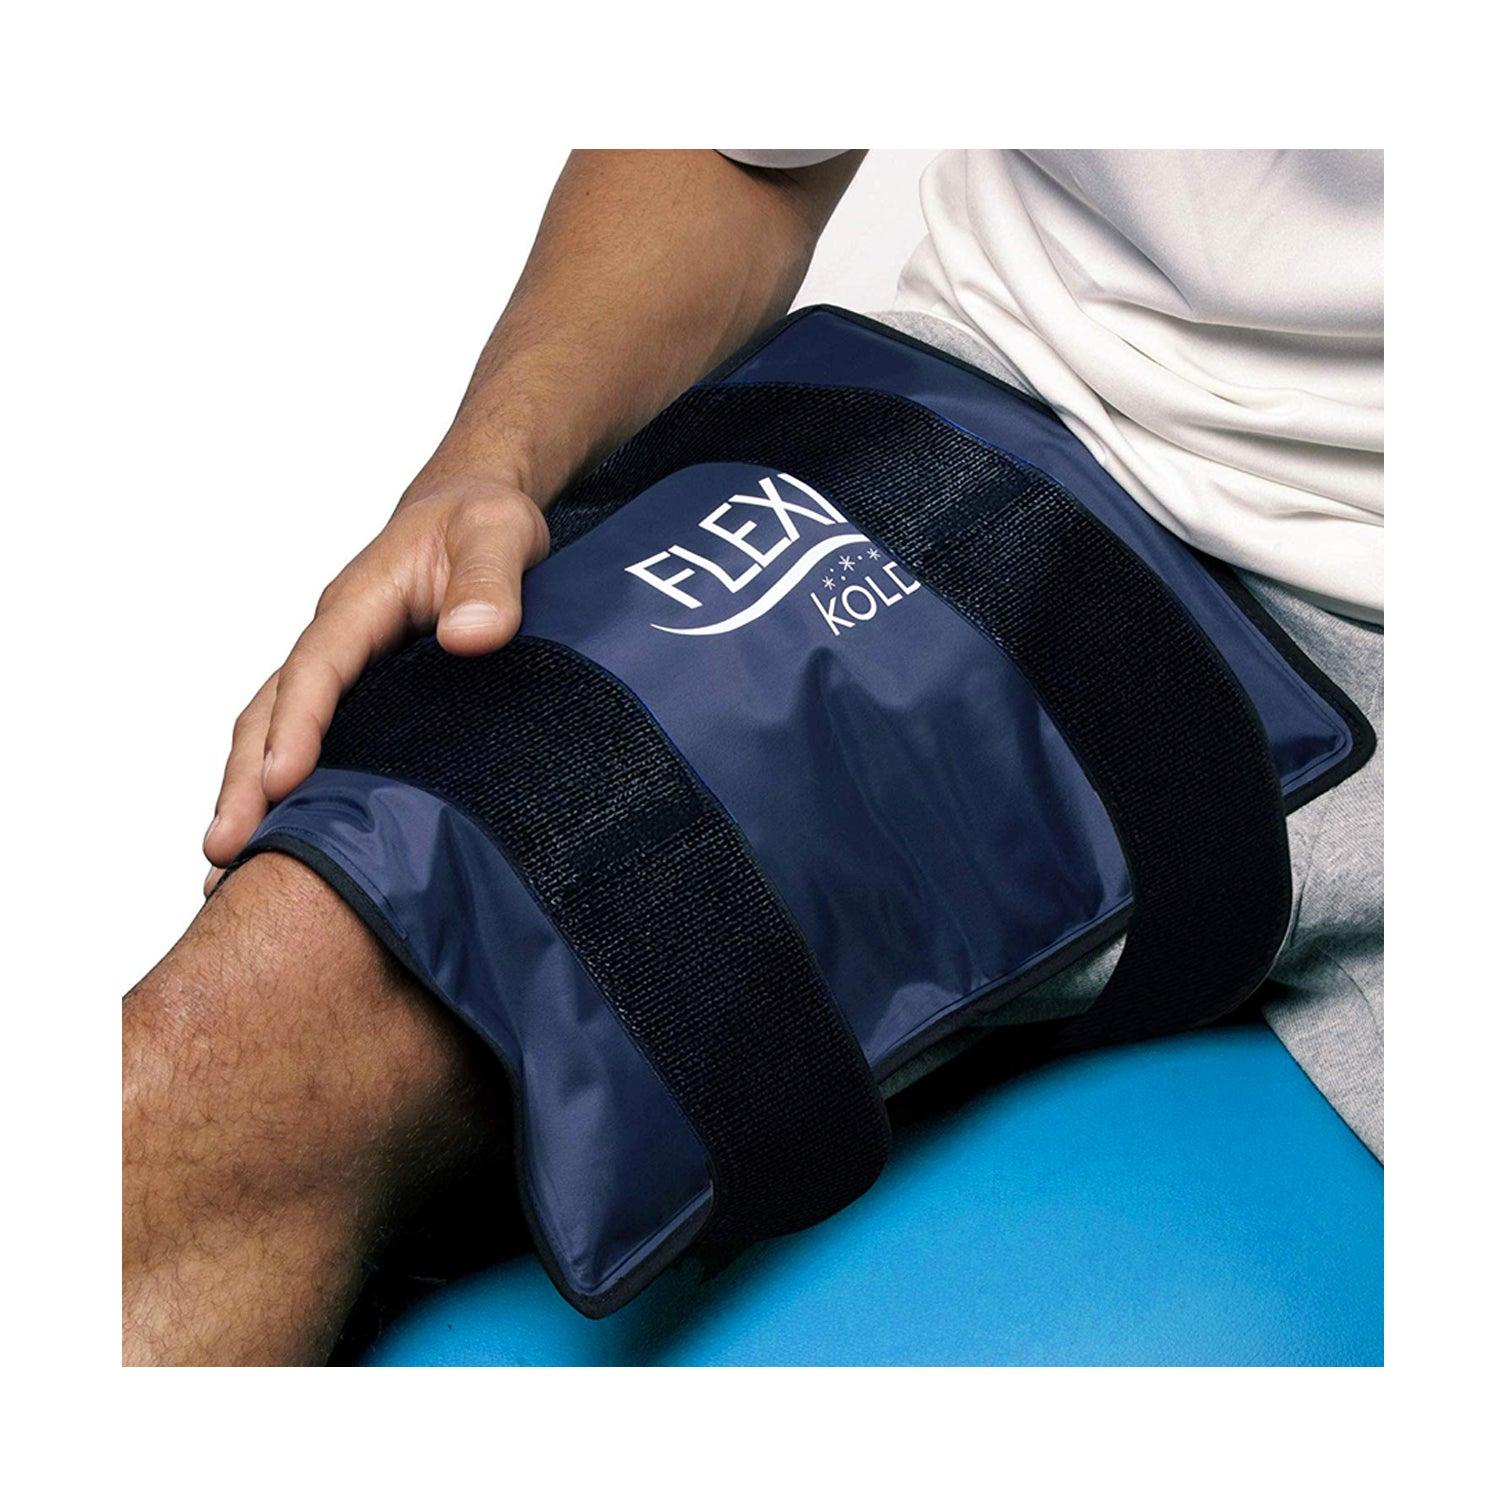 FlexiKold Gel Cold Pack with Strap on thigh